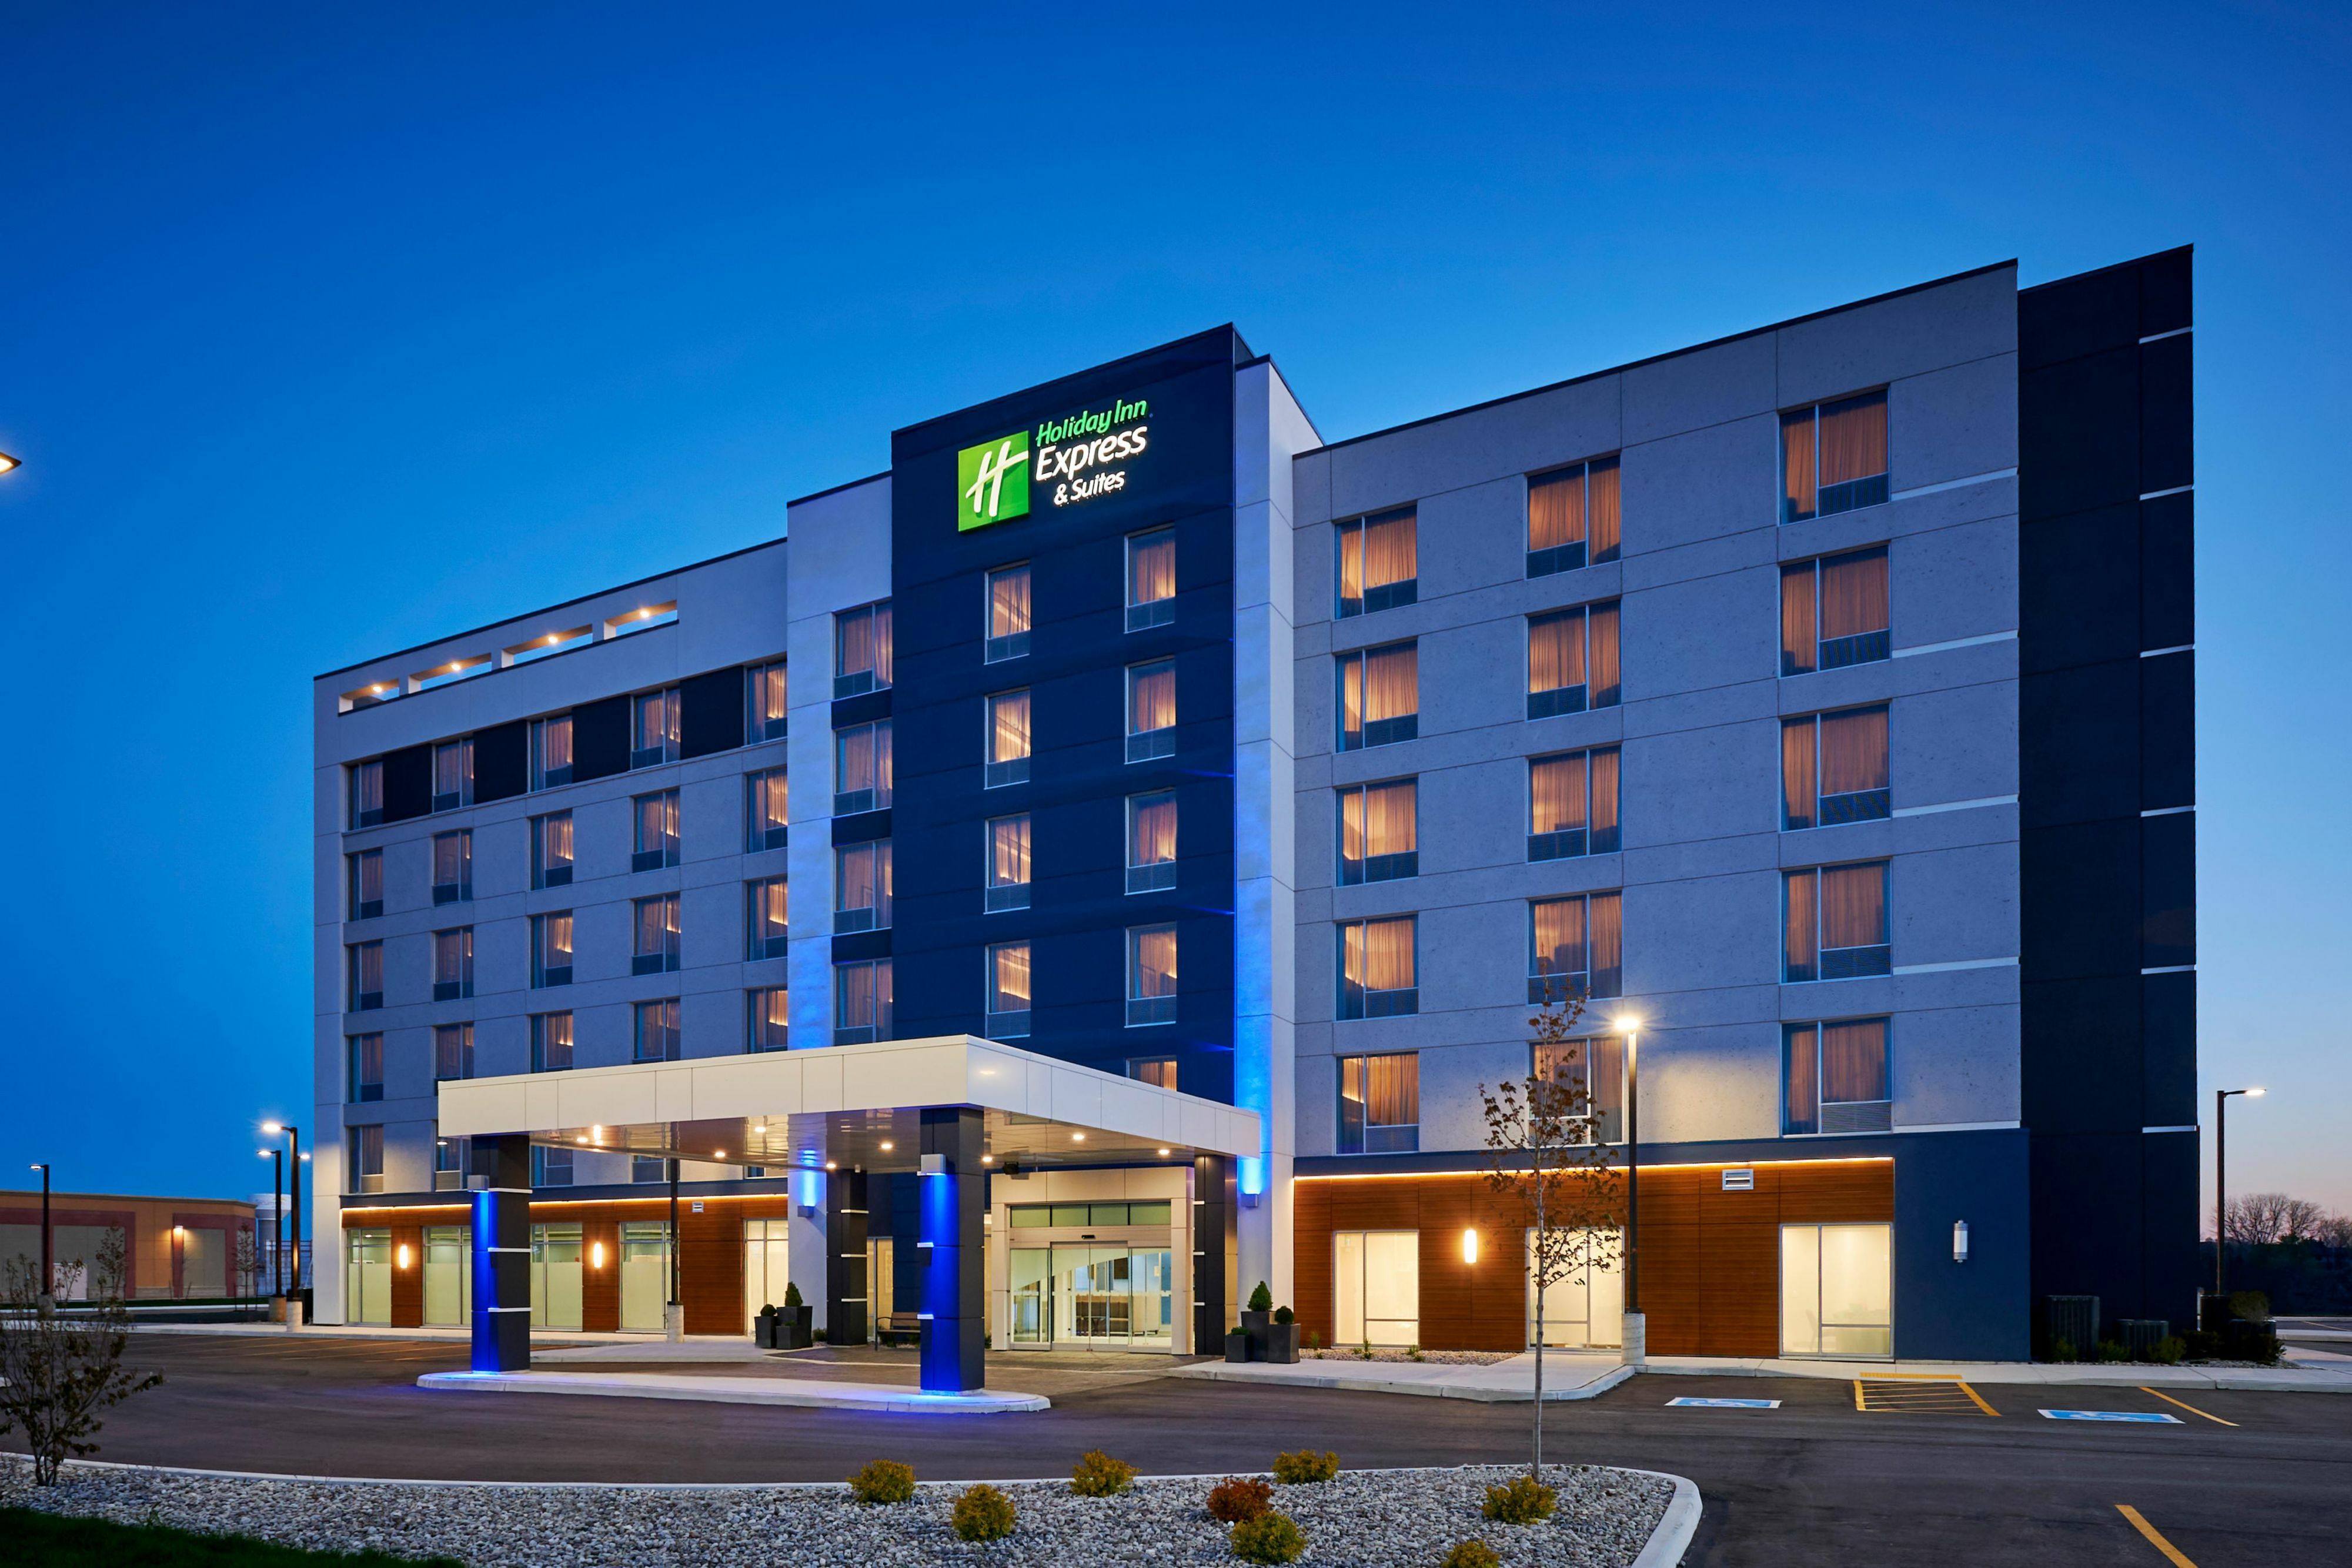 Photo of Holiday Inn Express & Suites Lakeshore – Tecumseh, Lakeshore, ON, Canada